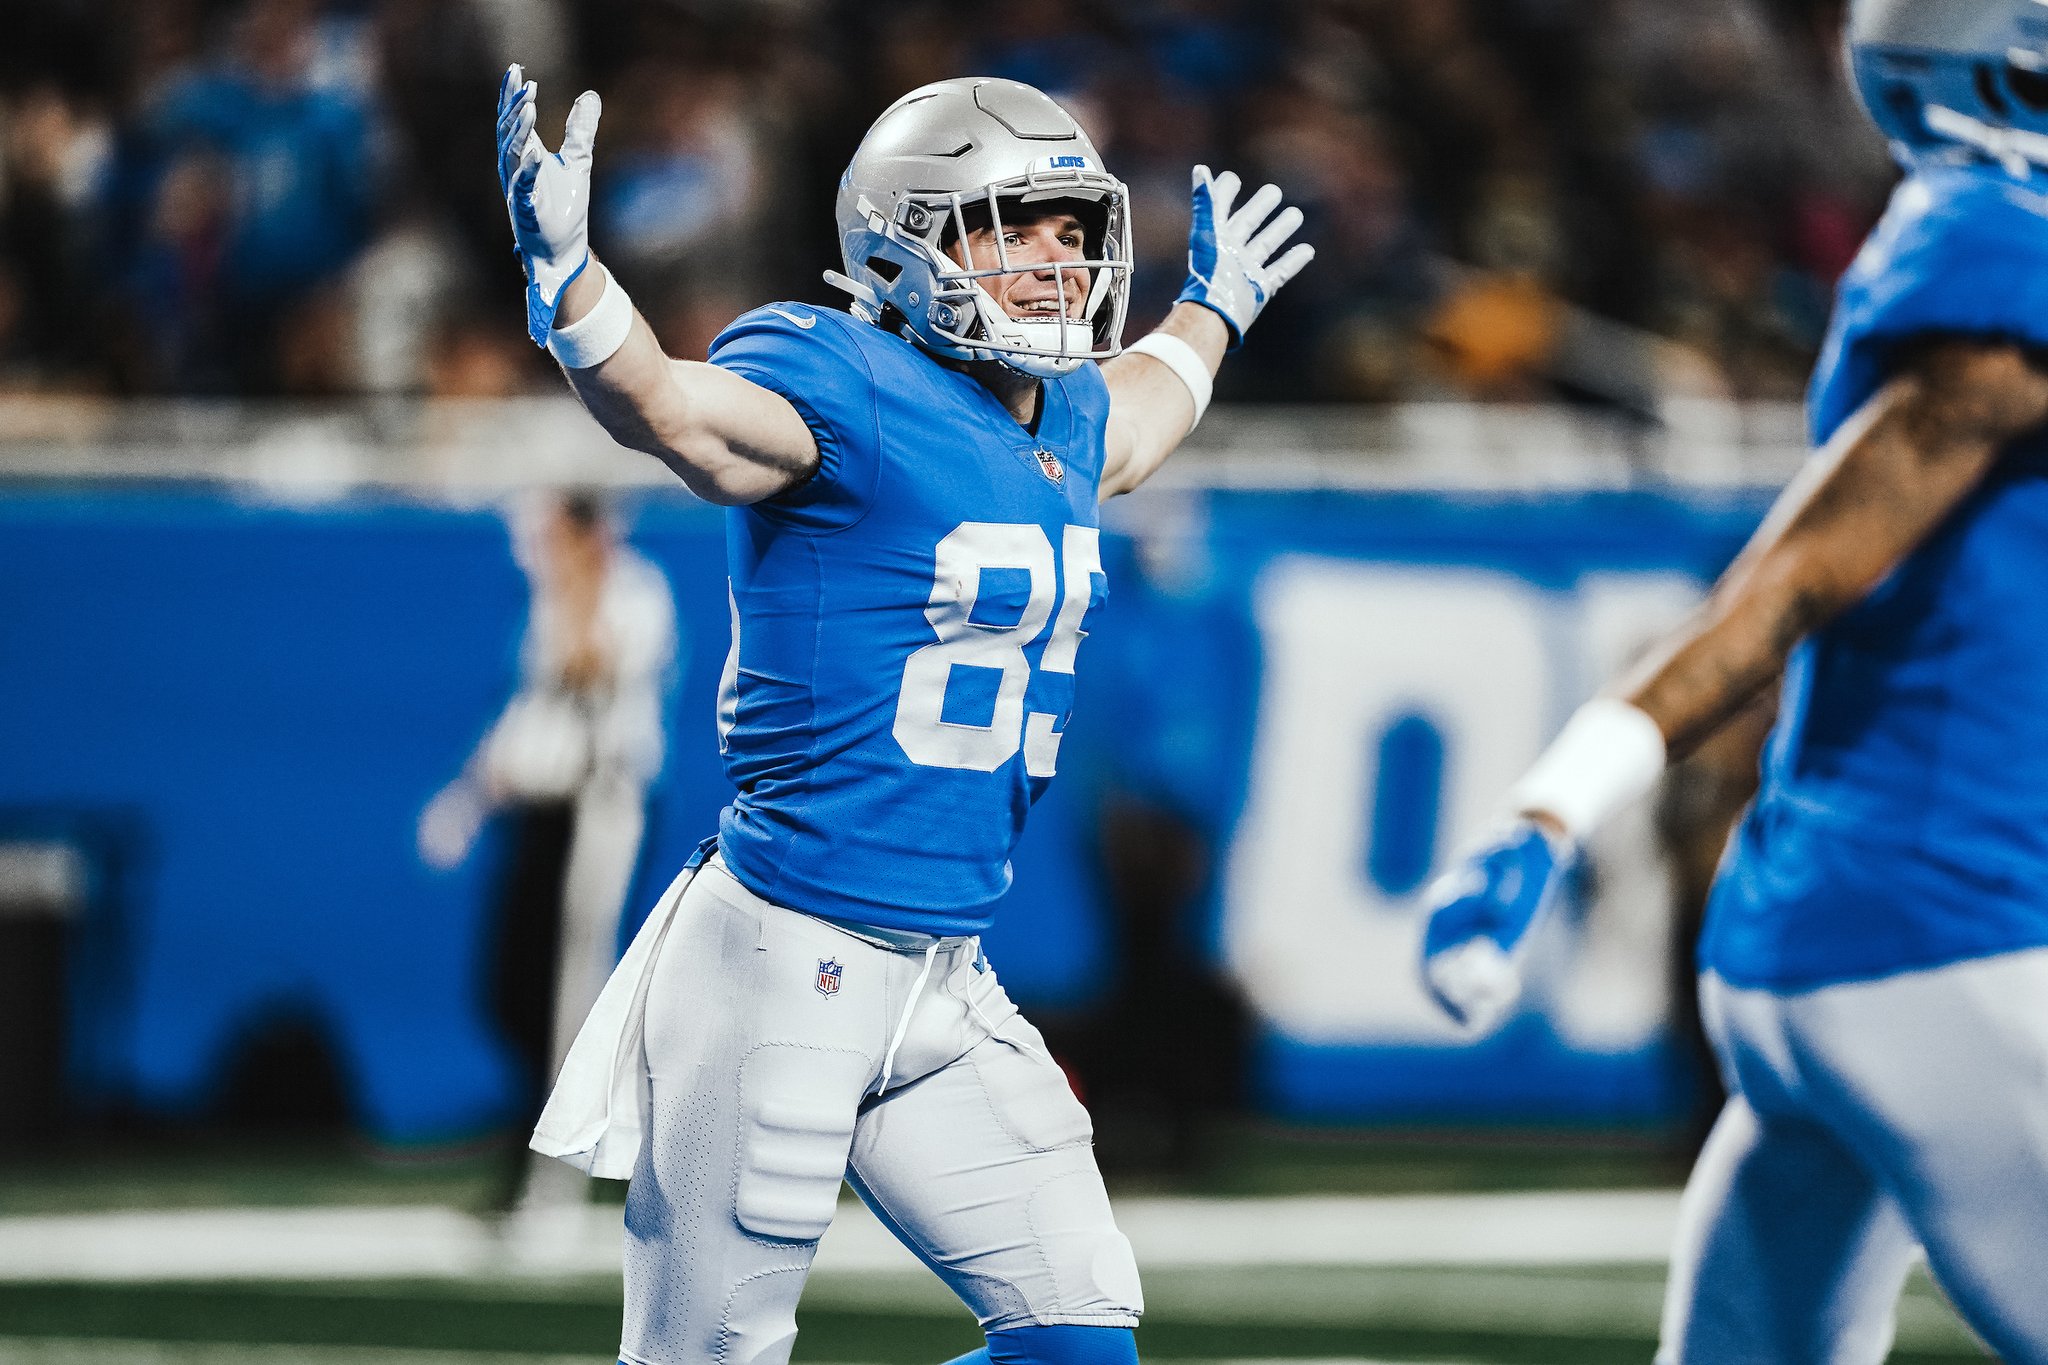 Kennedy records first-career touchdown Sunday for Lions